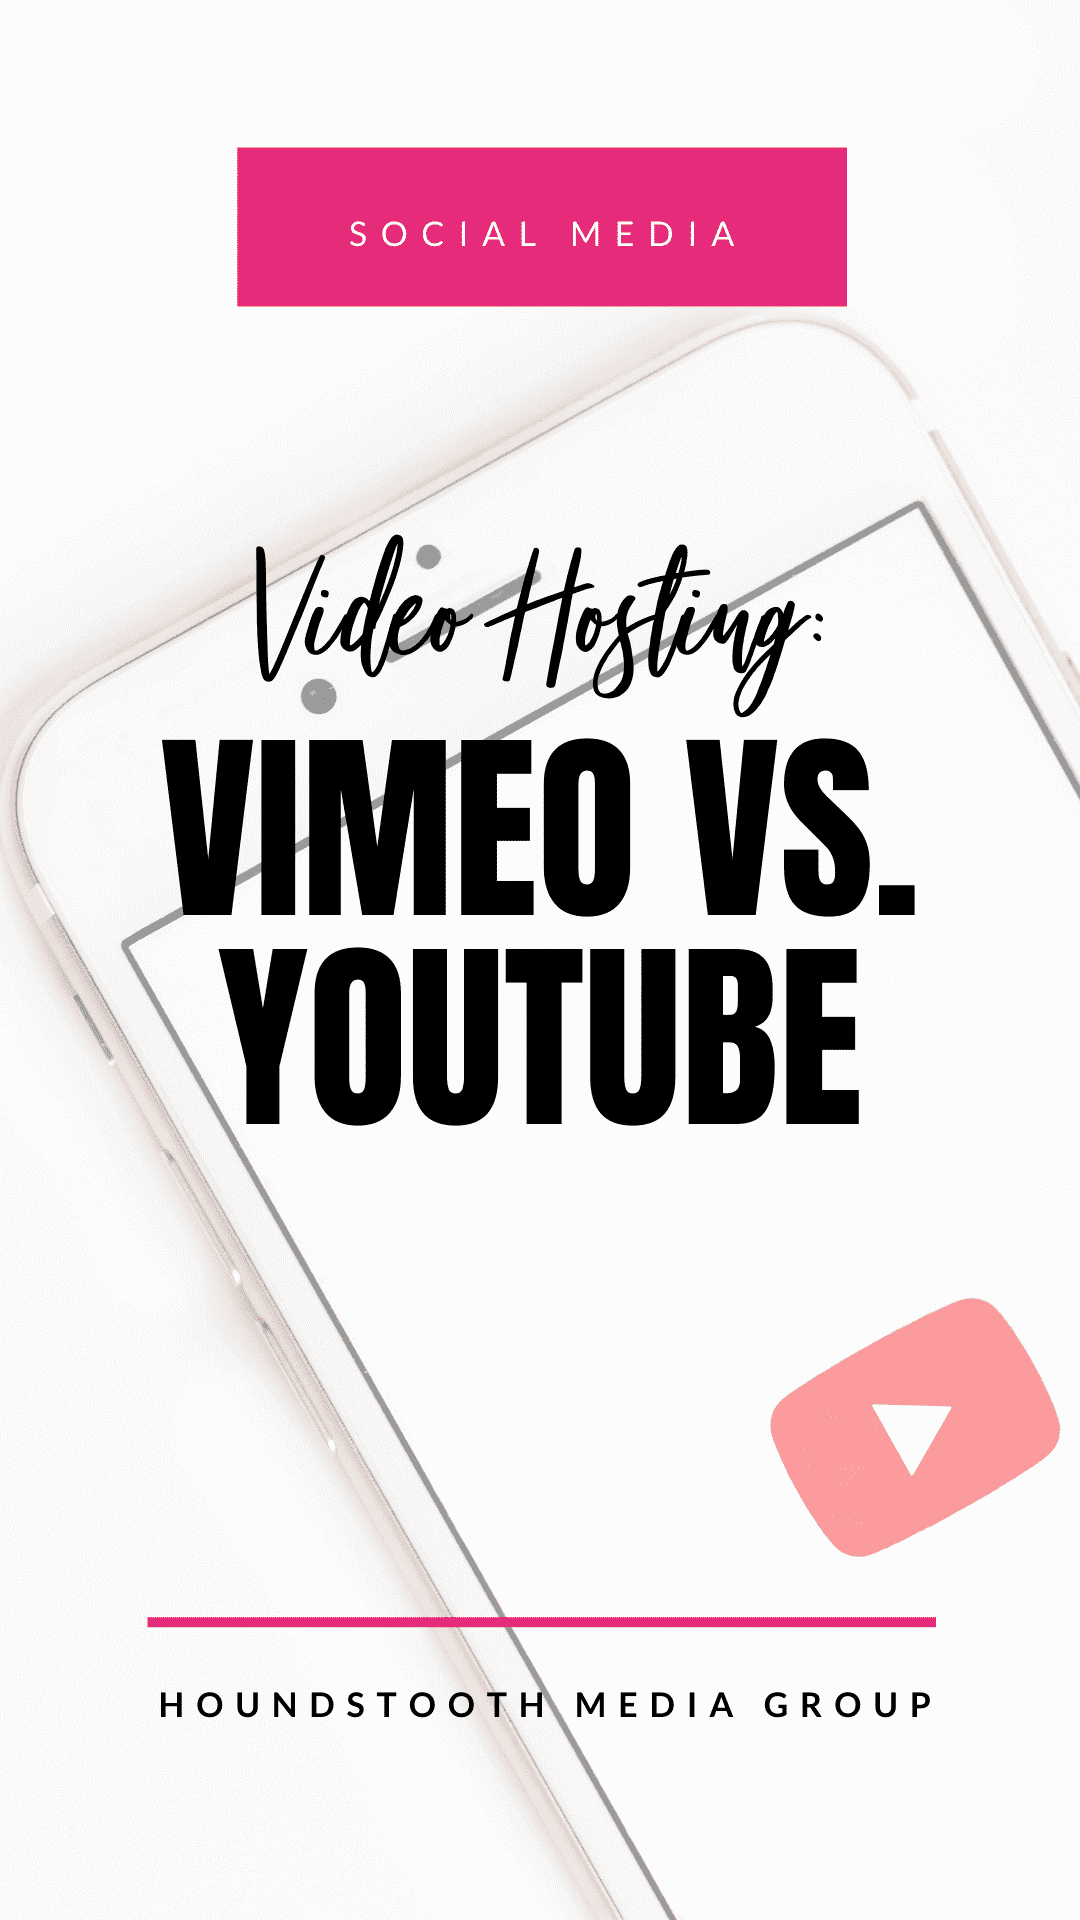 vimeo or youtube which is better